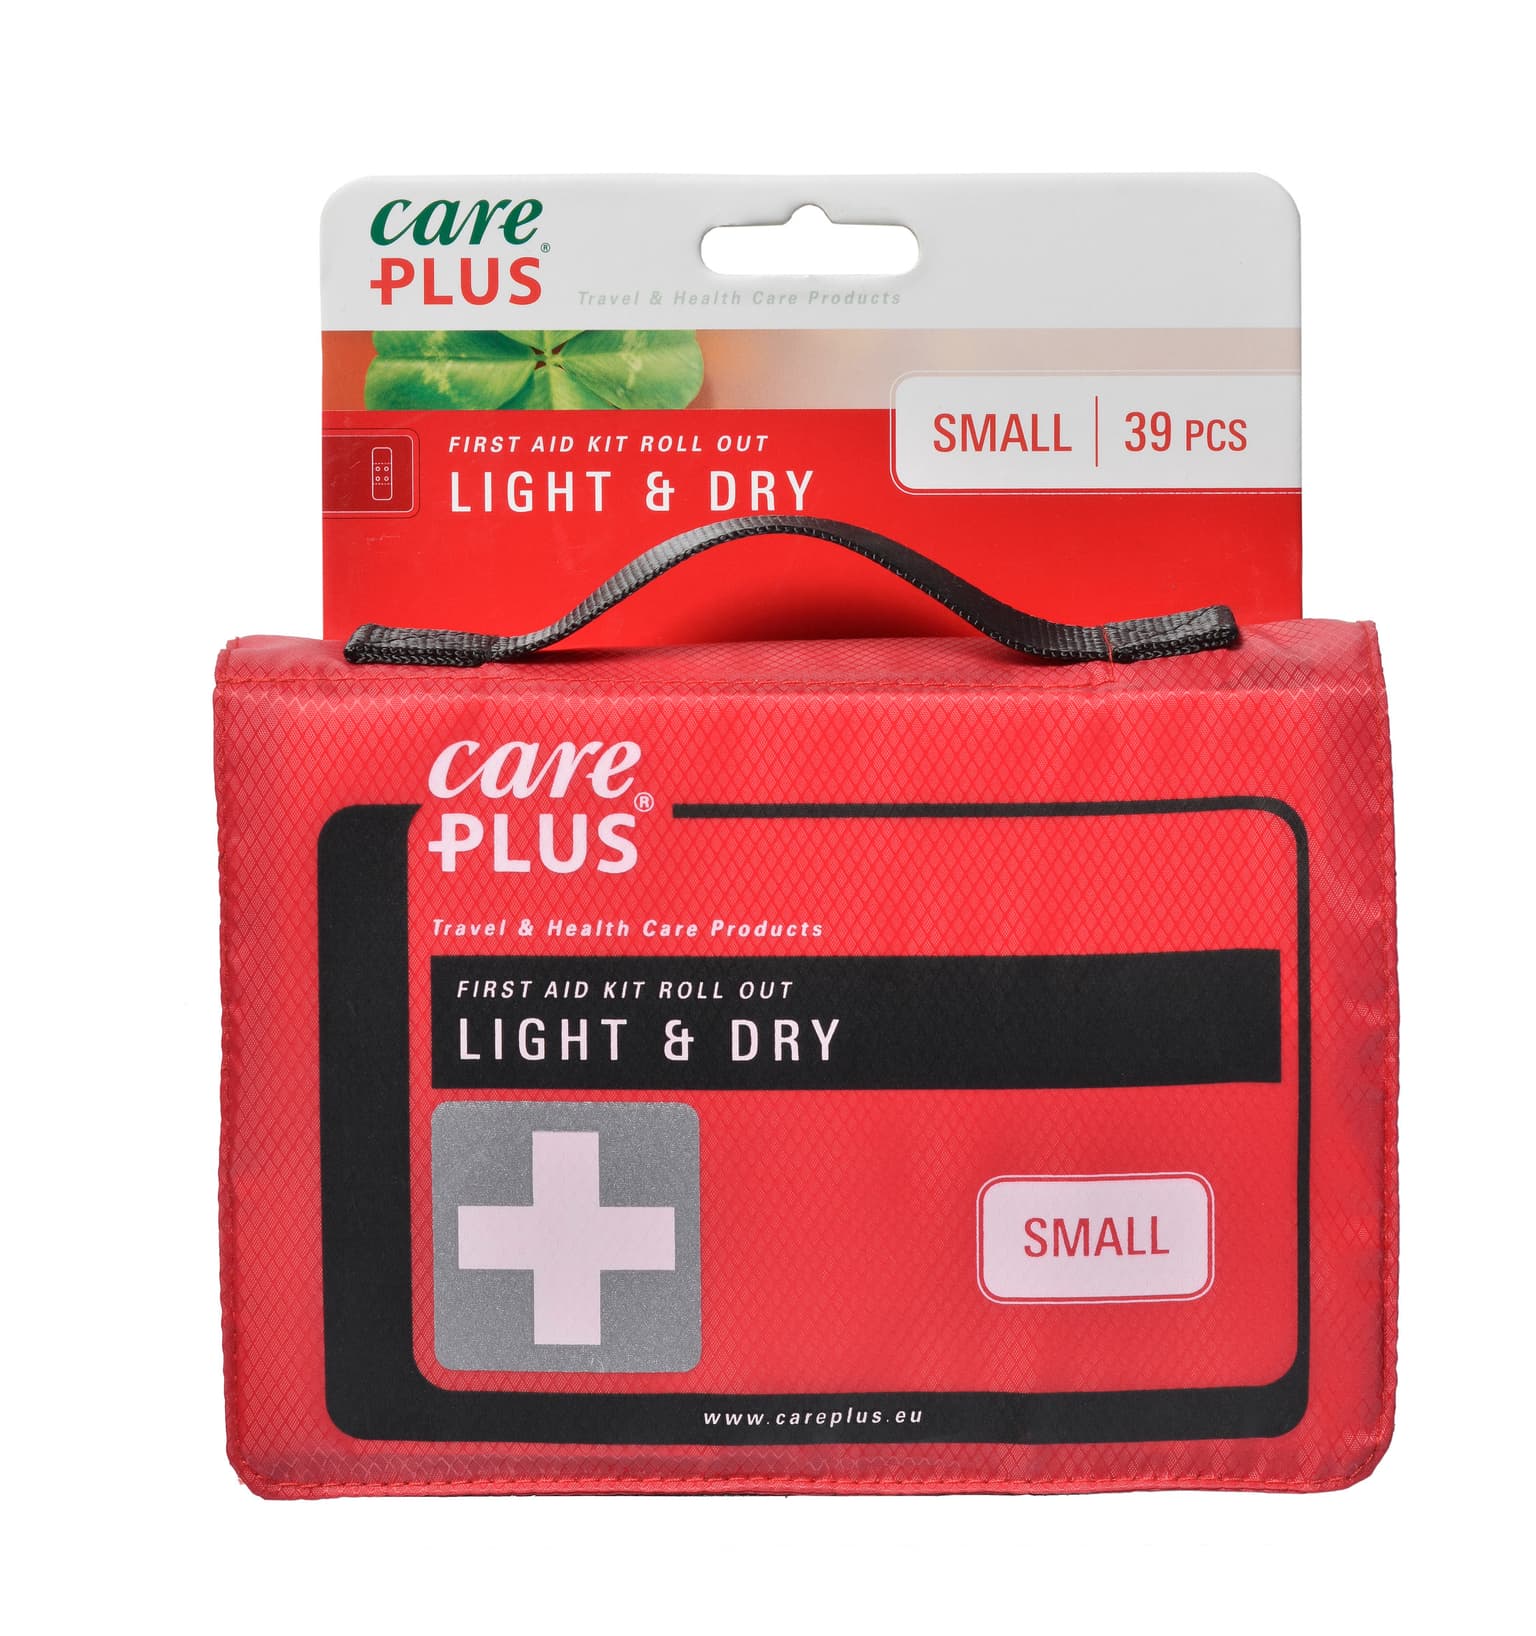 Care Plus Care Plus First Aid Roll Out - Light & Dry Small Kit di primo soccorso 1